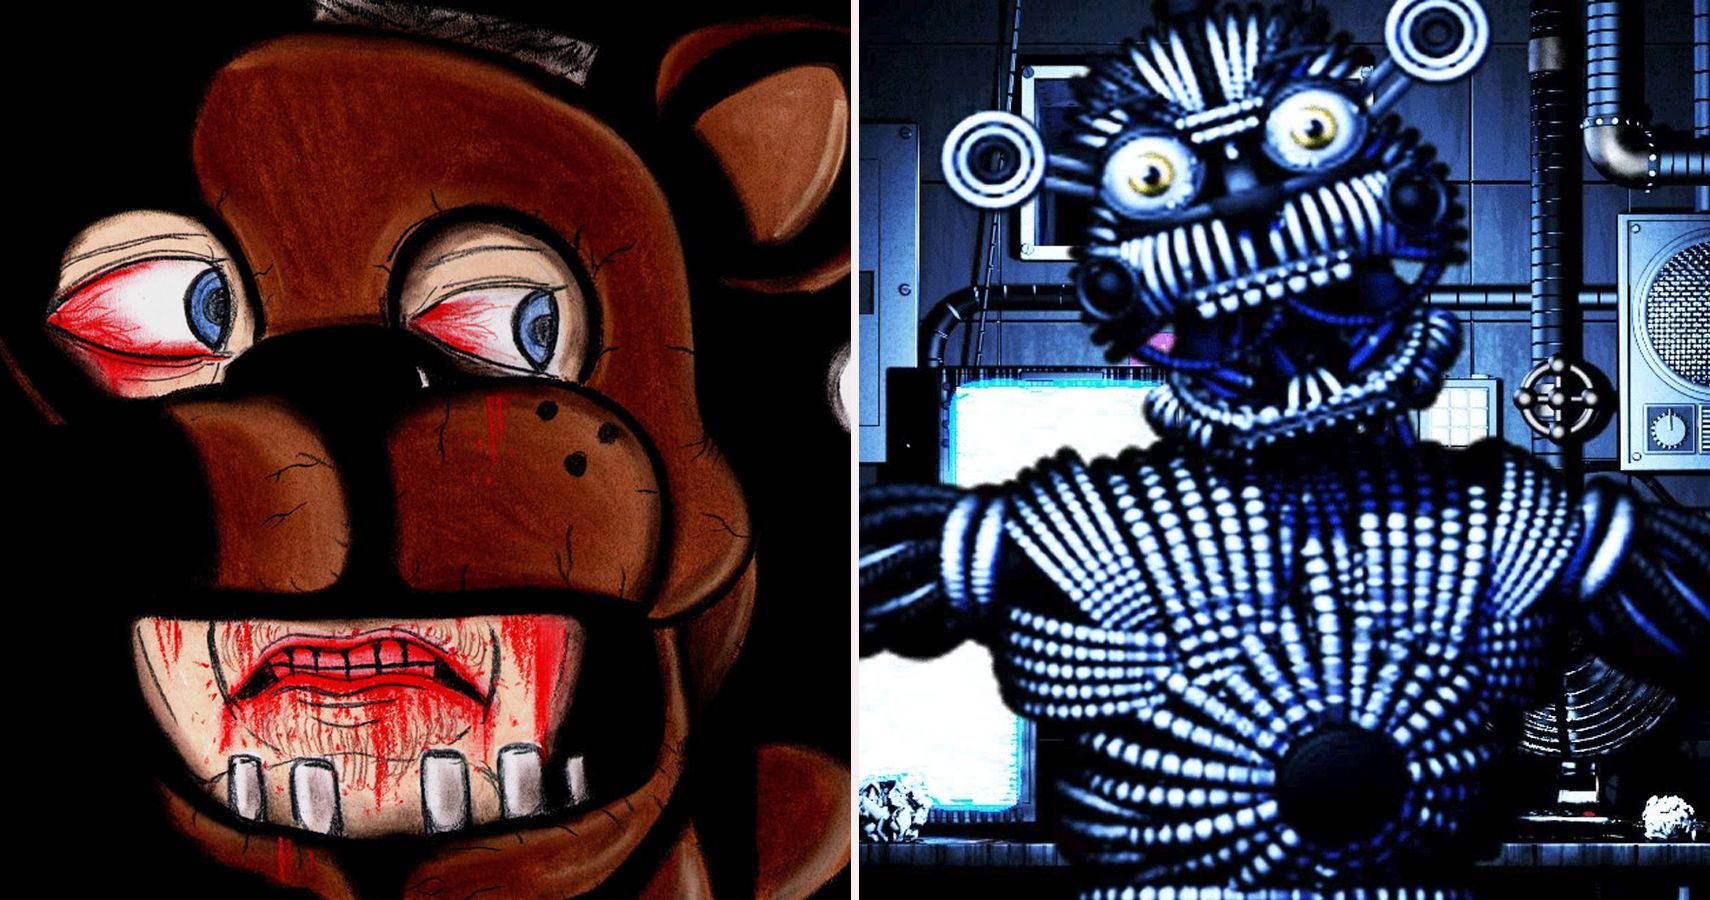 Five Nights At Freddy S Fan Theories So Crazy They Might Be True